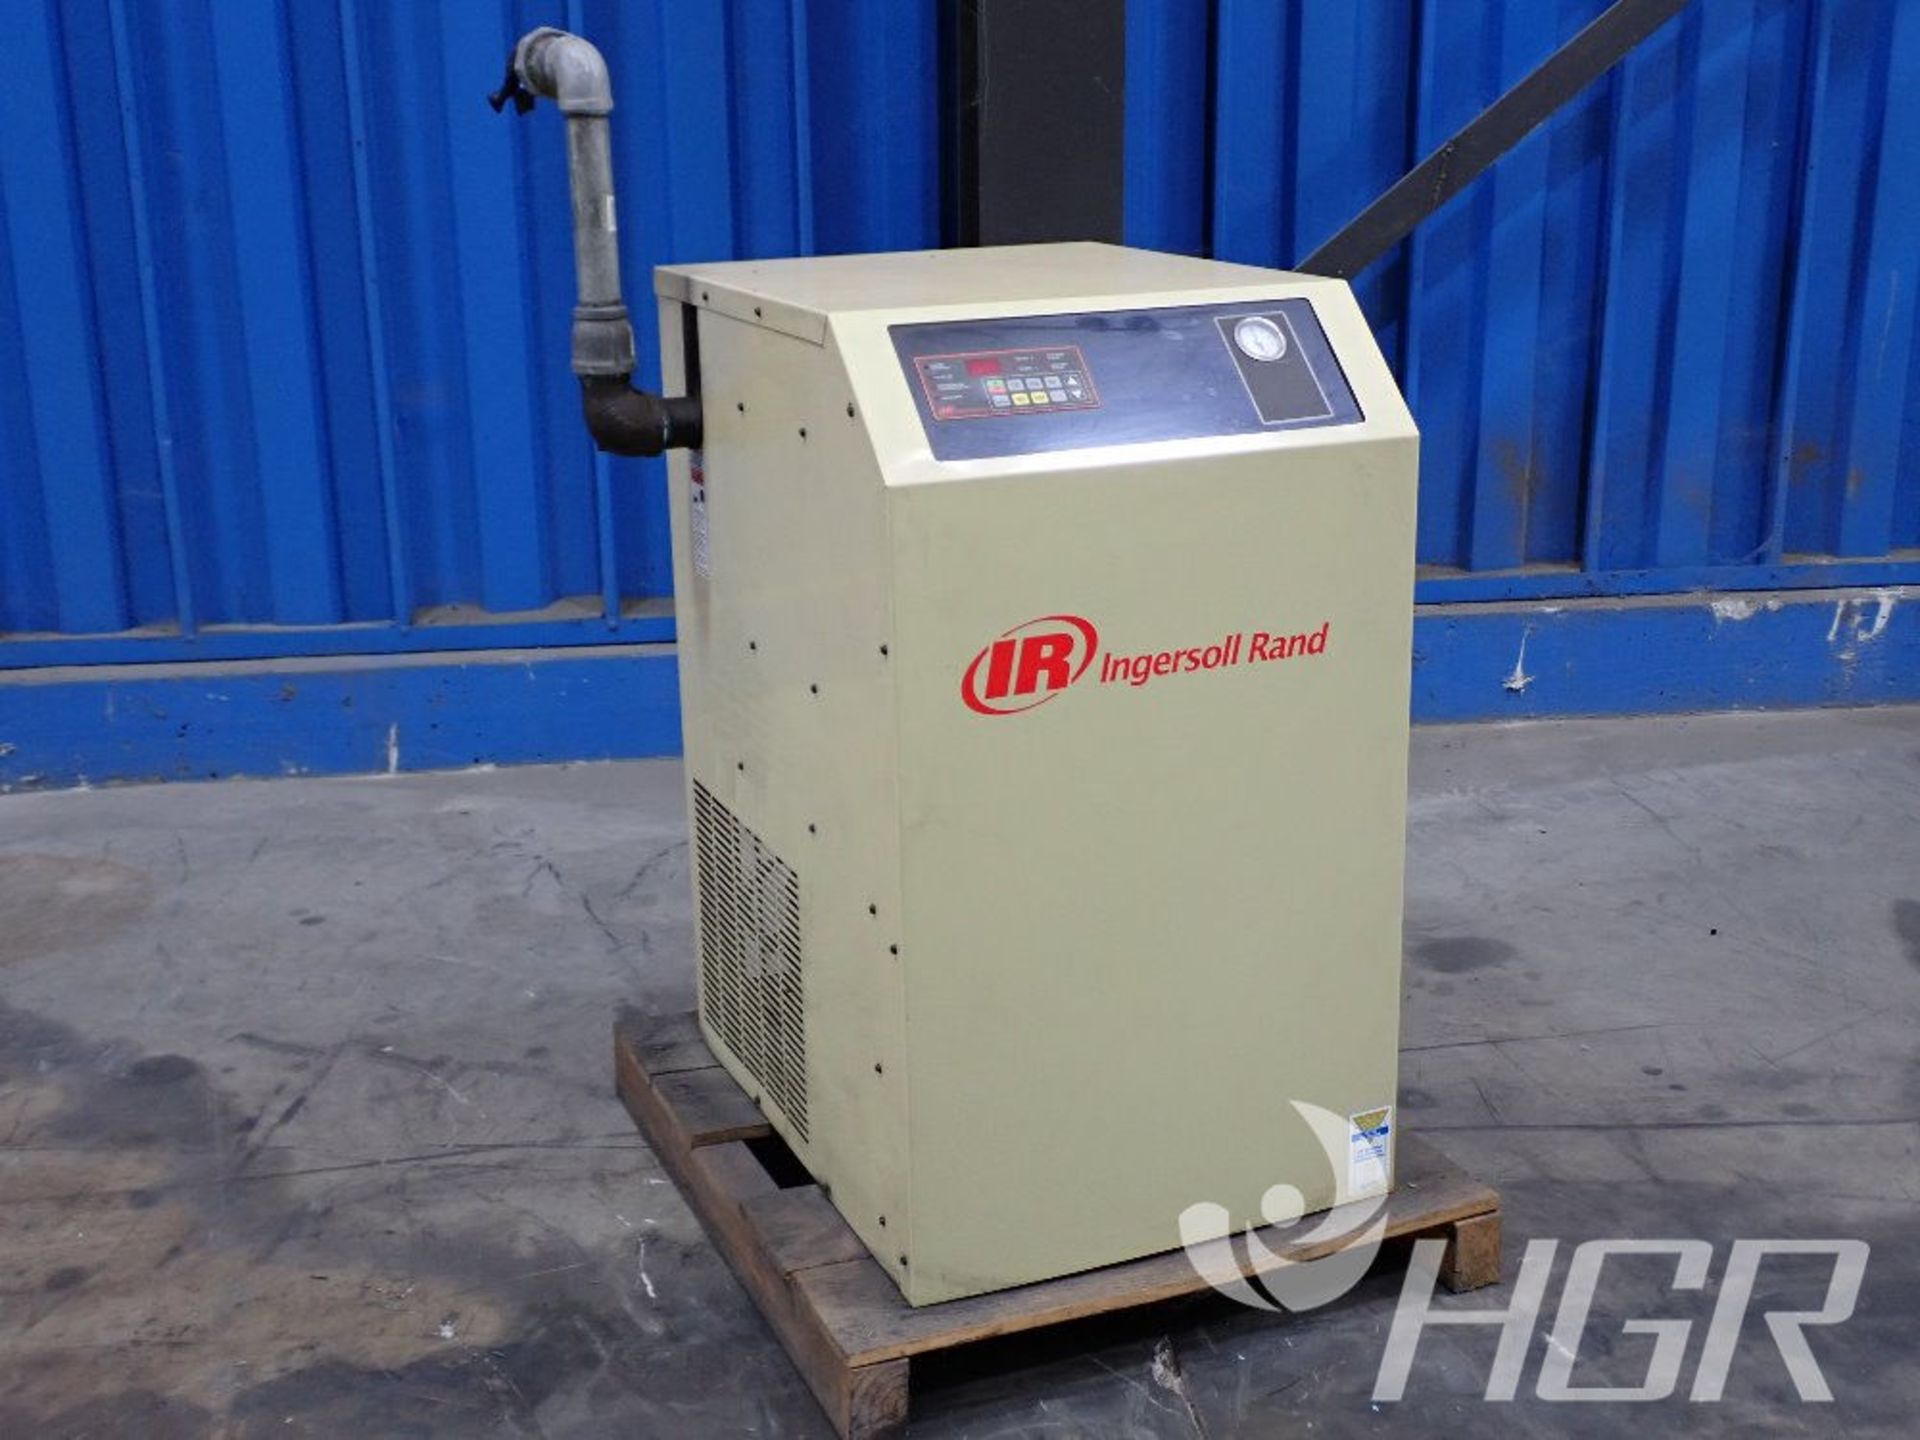 INGERSOLL RAND AIR DRYER, Model D680INA400, Date: n/a; s/n WCH1011723, Approx. Capacity: n/a, Power: